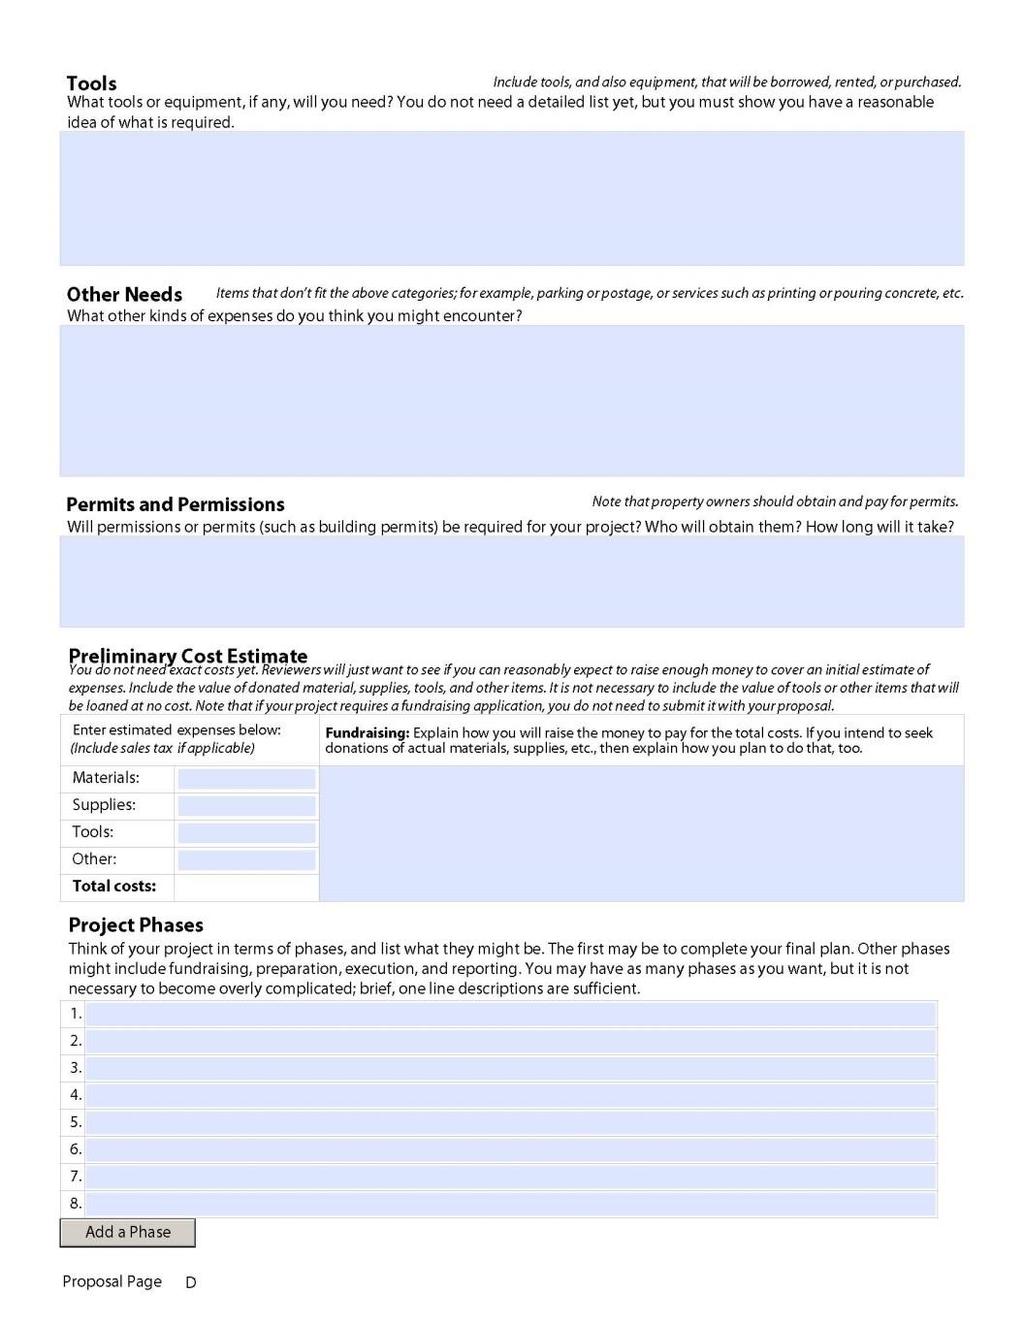 Proposal Page D Tools Other Needs Permits &